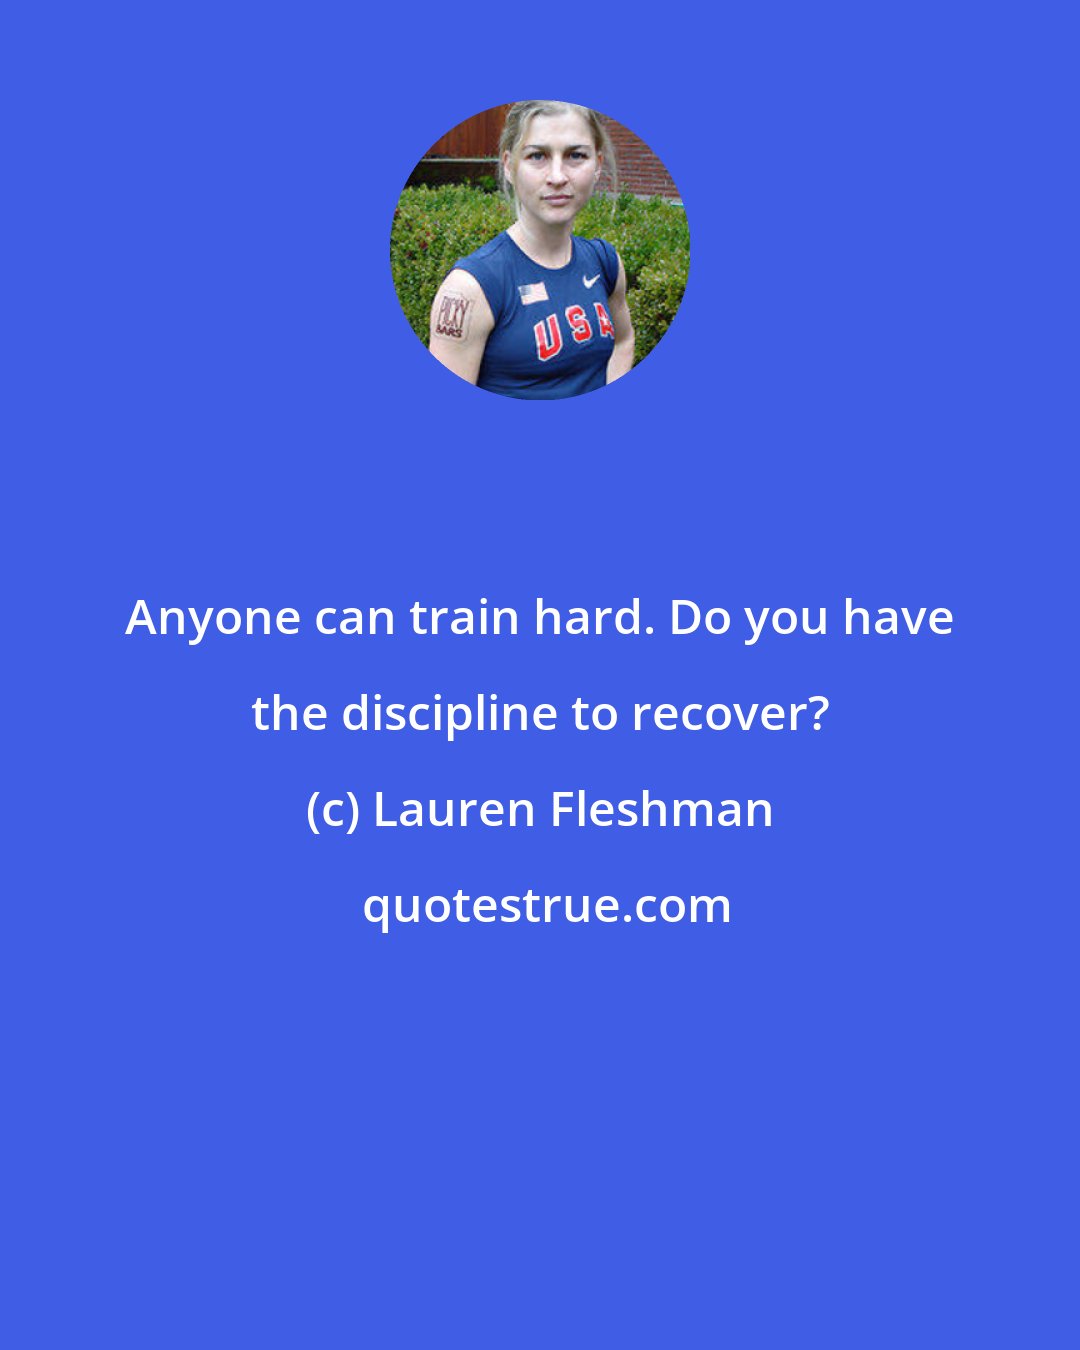 Lauren Fleshman: Anyone can train hard. Do you have the discipline to recover?